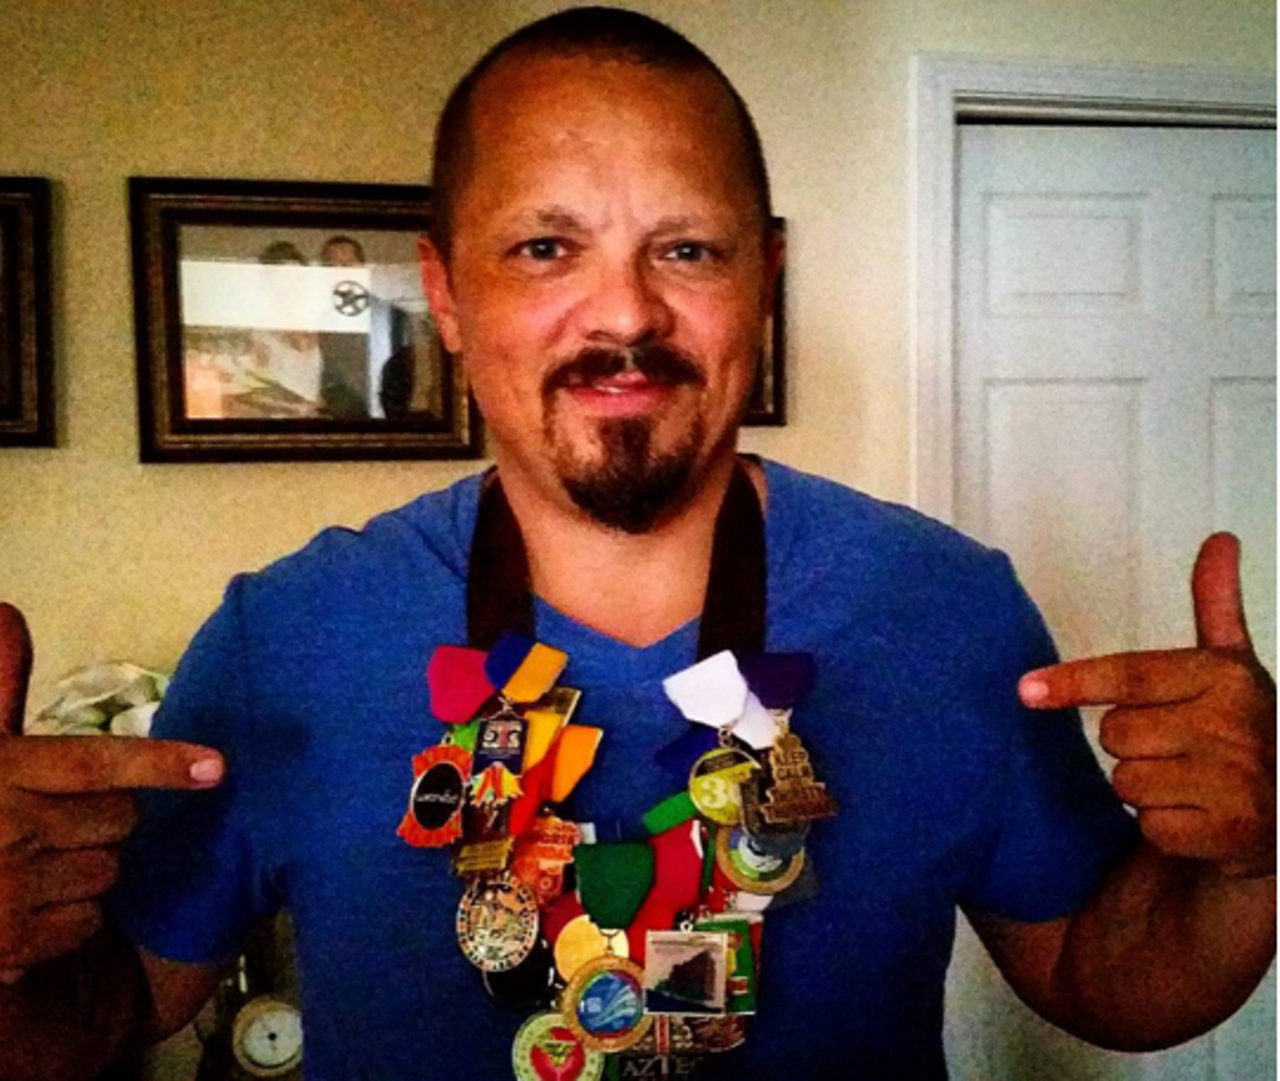 Who loves Fiesta medals? This guy, that's who.
Photo via Instagram/petersonentertainment